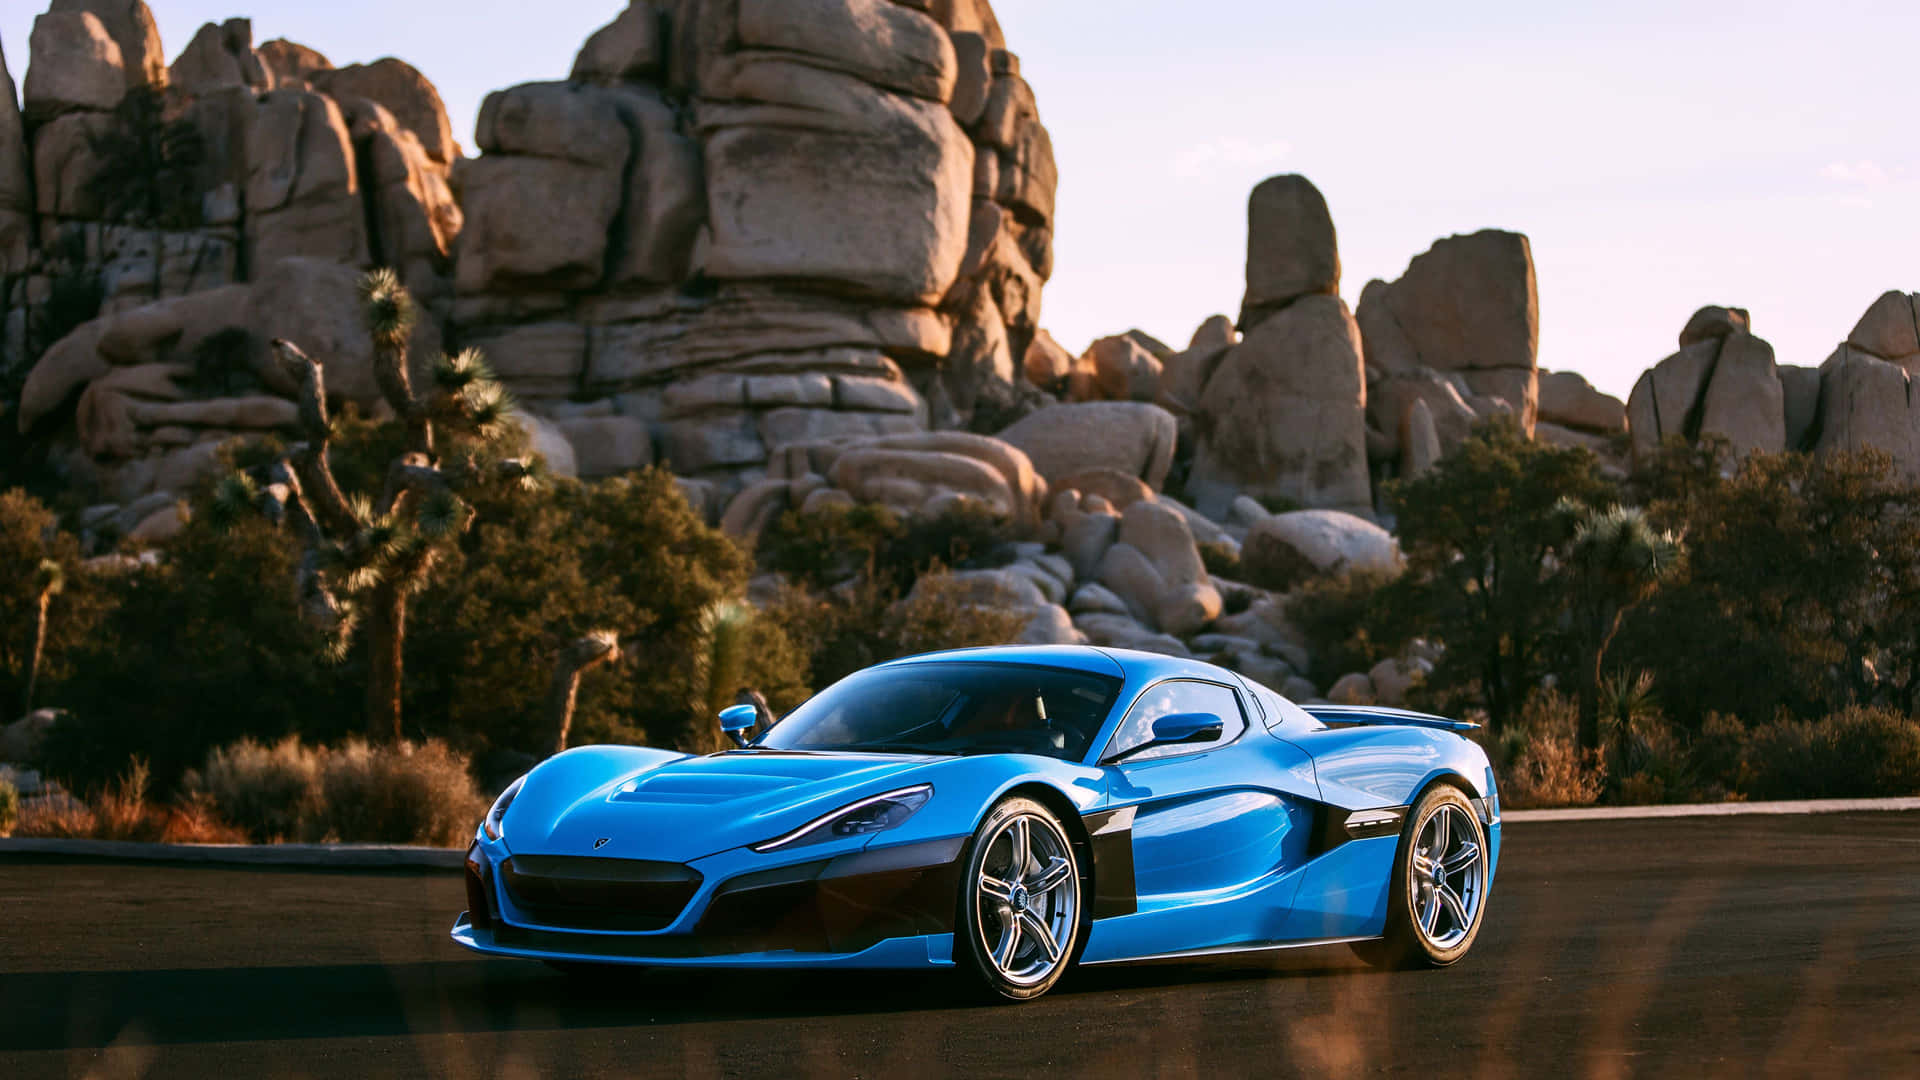 Rimac Automobili Electric Hypercar on the Move Wallpaper